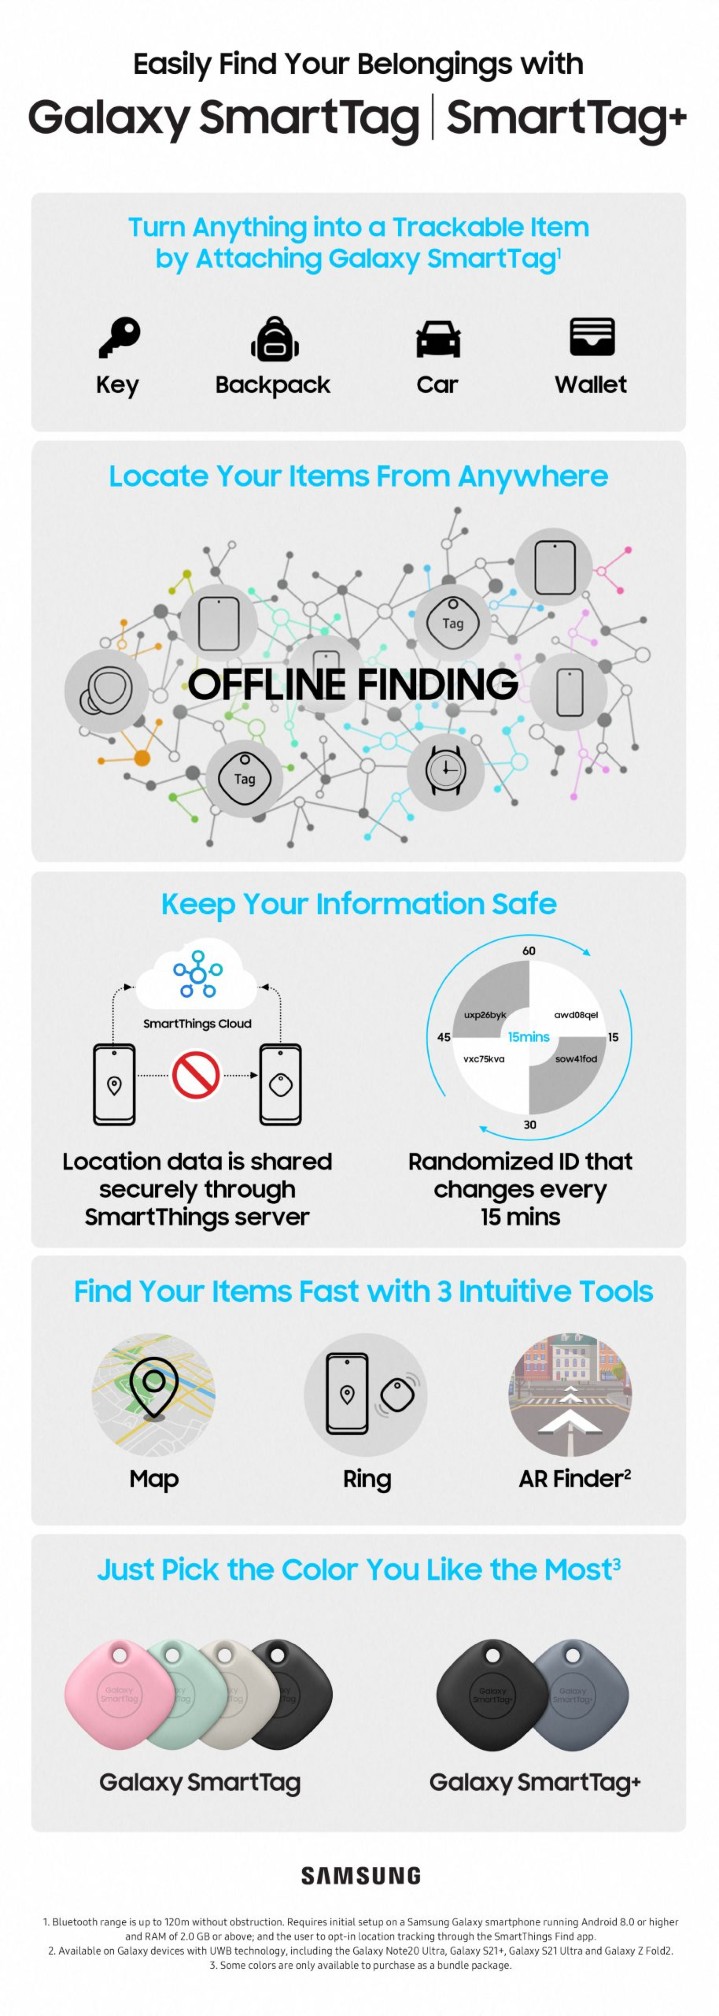 Infographic-Easily-Find-Your-Belongings-with-Galaxy-SmartTag_SmartTag-scaled-1.jpg